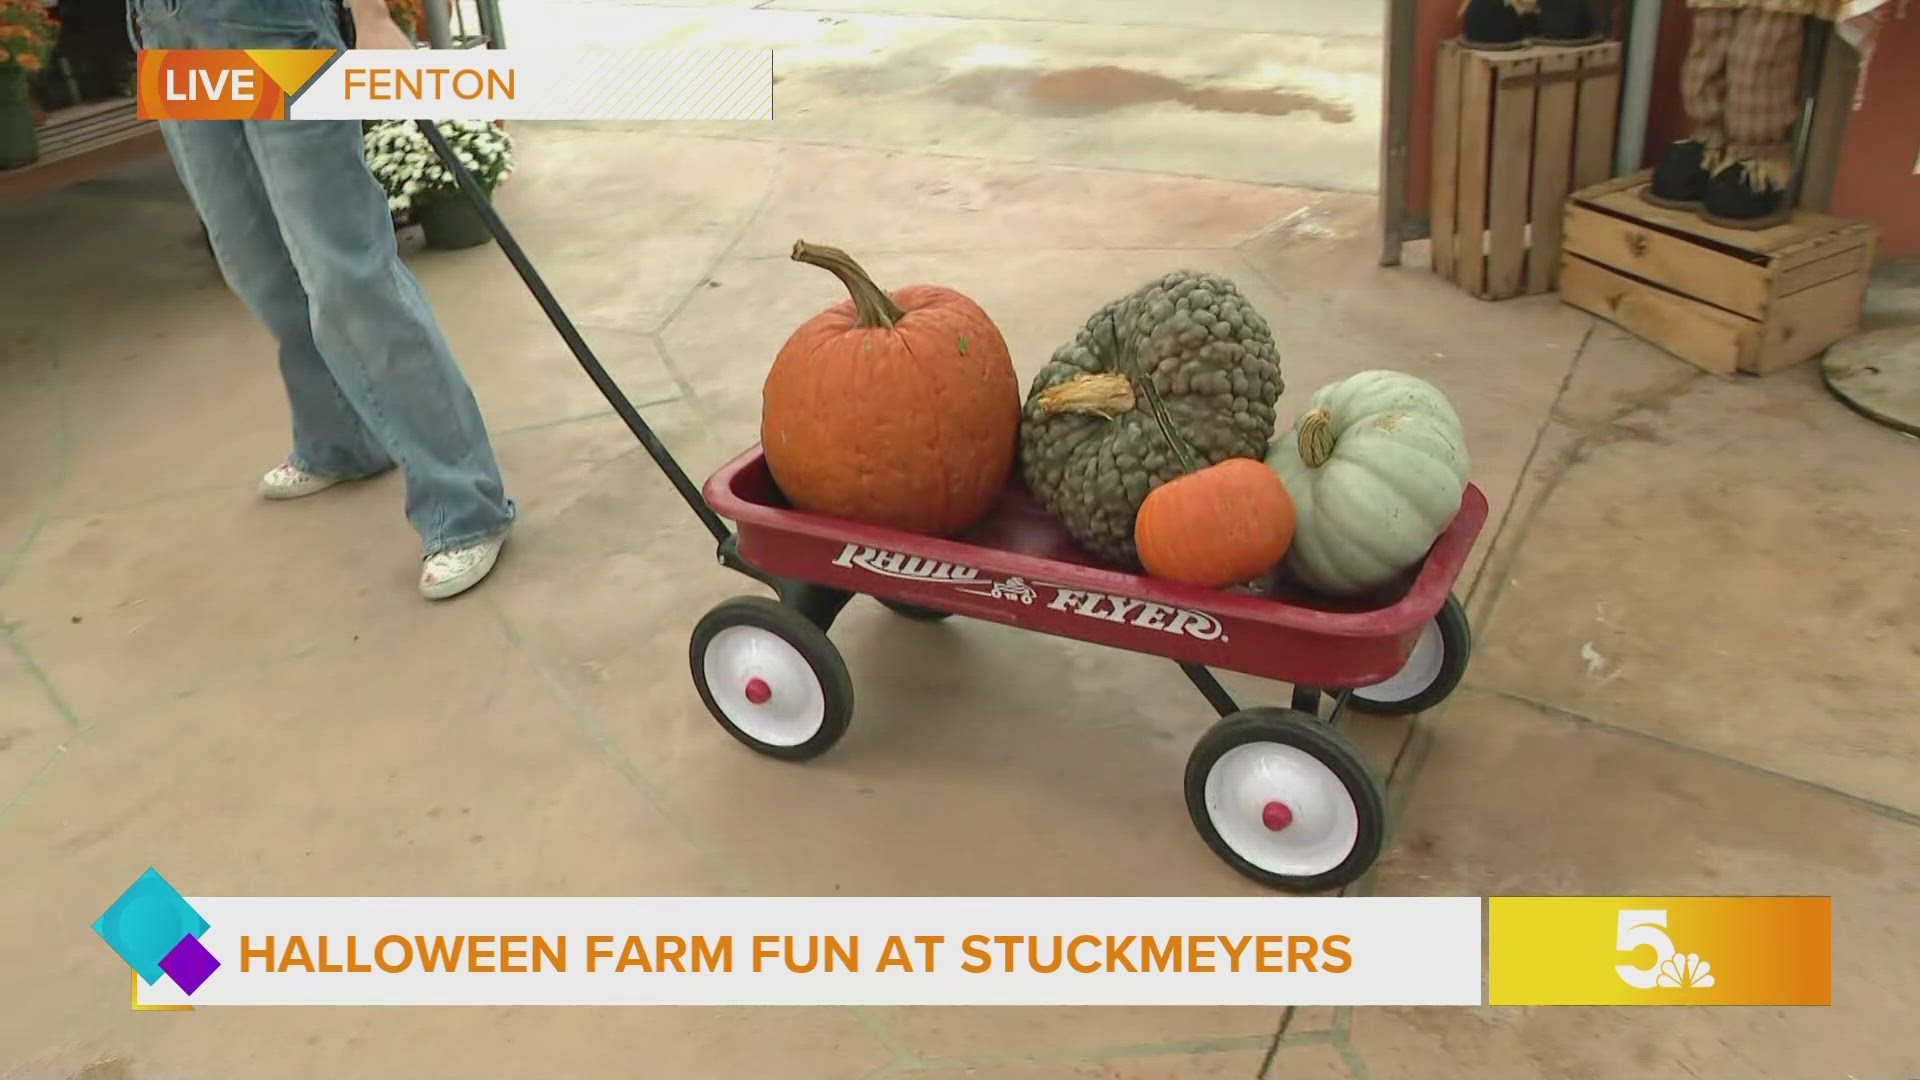 Halloween Farm Fun Days is happening every weekend through October 31 at the farm.